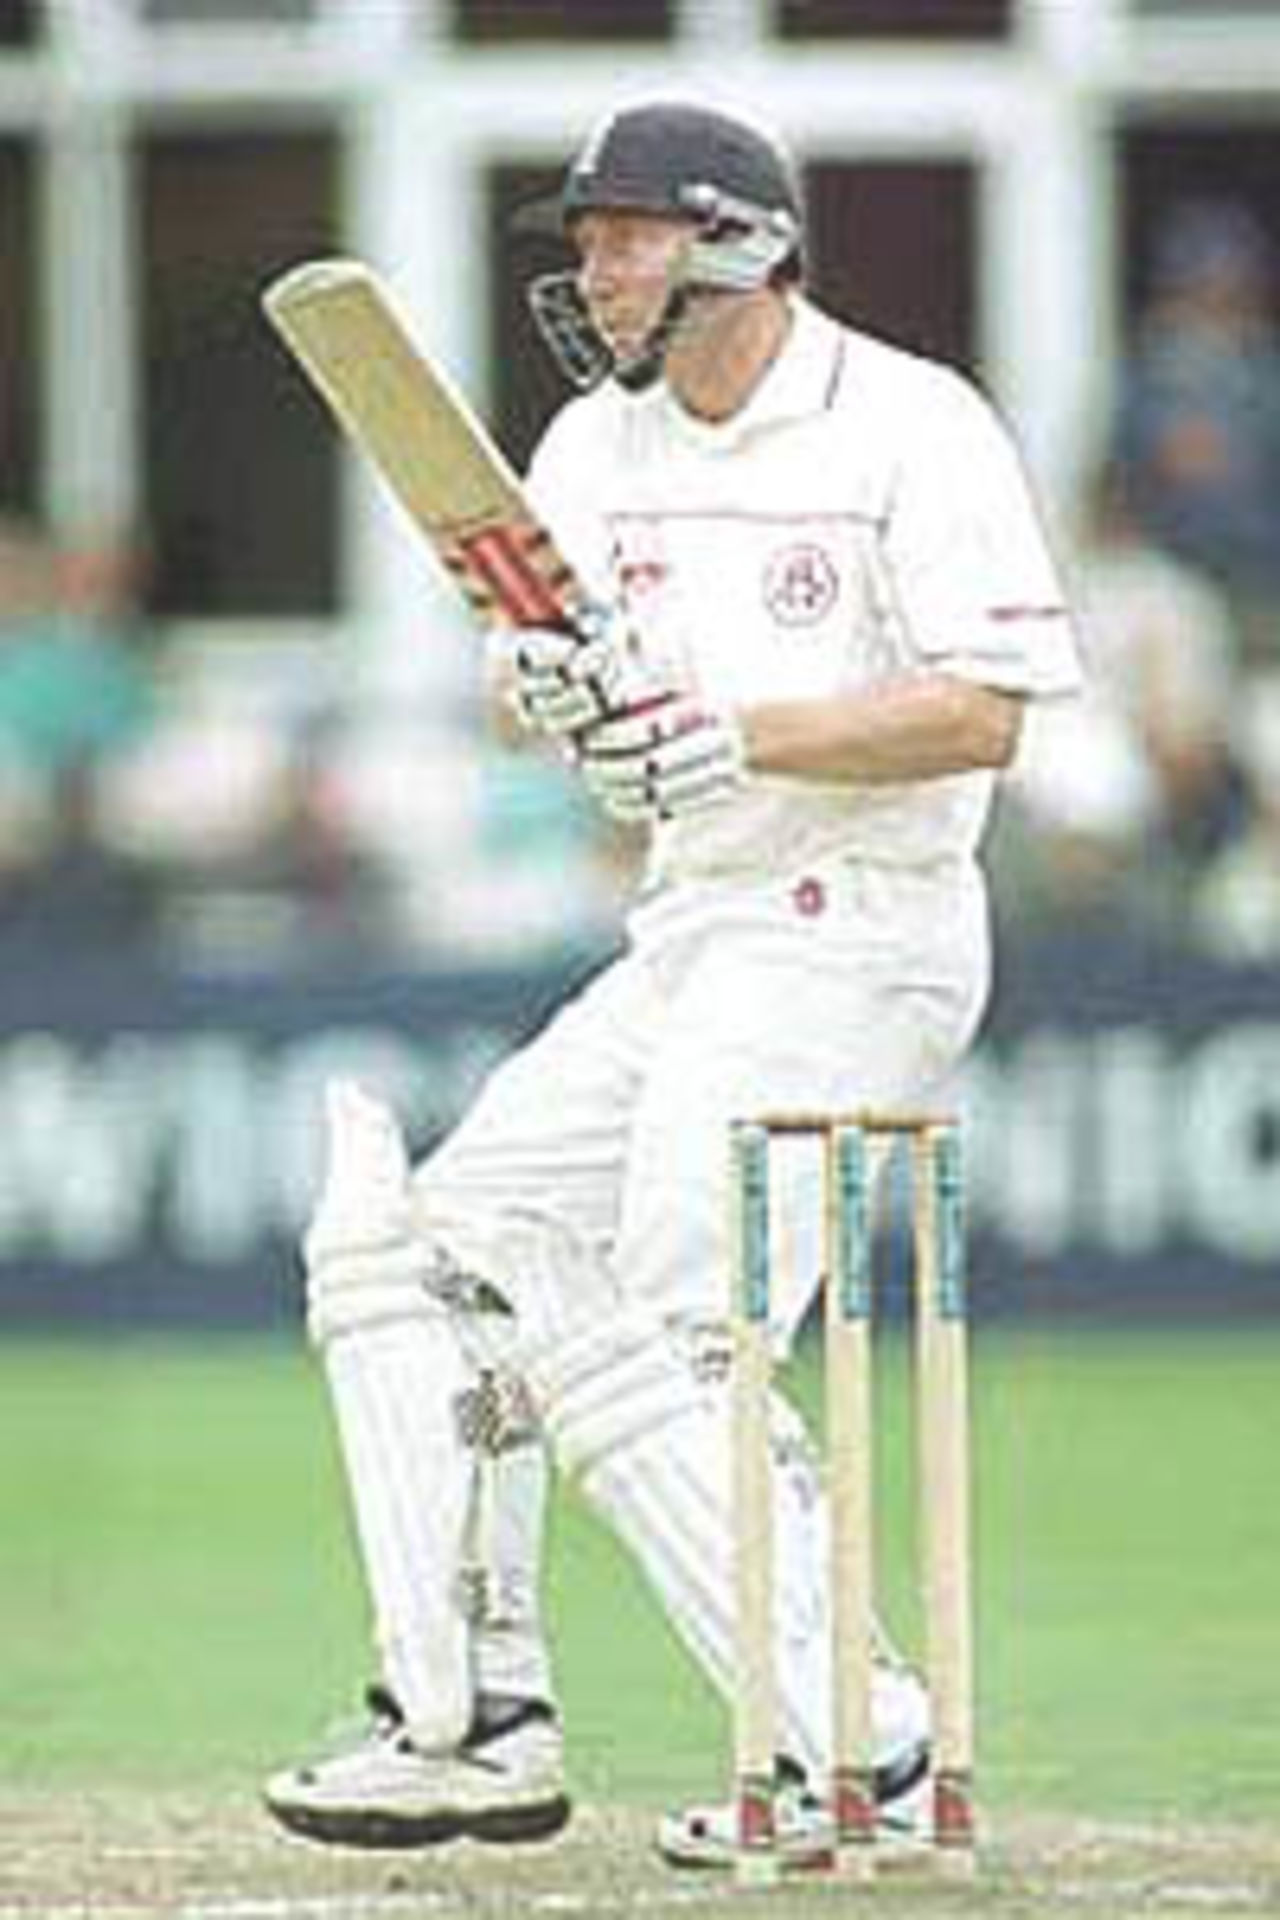 Mike Atherton hooks Rose for 4, PPP healthcare County Championship Division One, 2000, Somerset v Lancashire, County Ground, Taunton, 12-15 July 2000(Day 3).